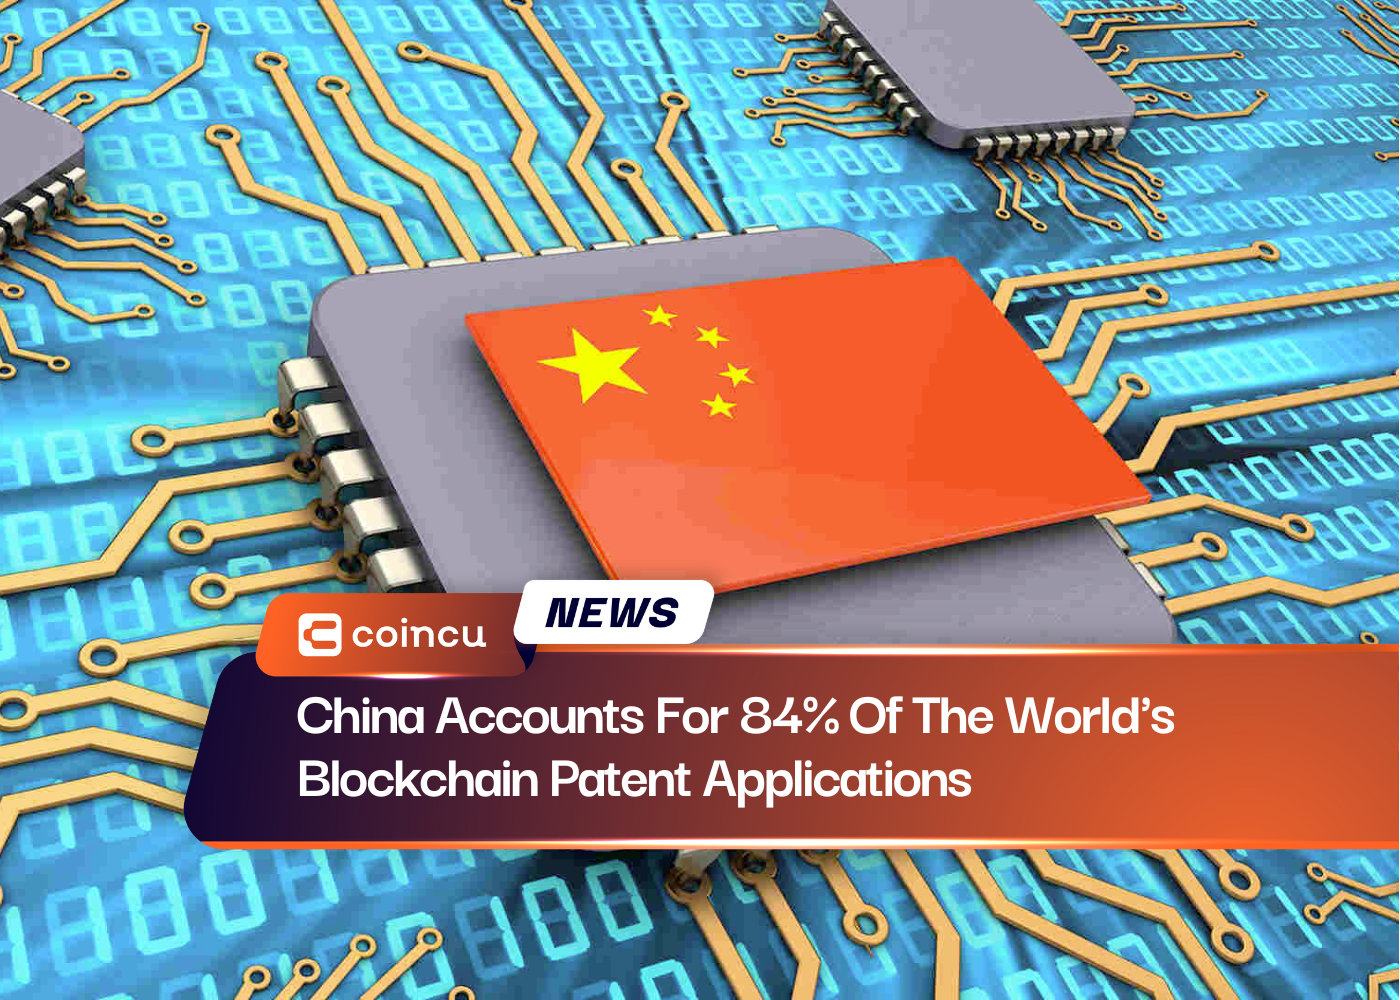 China Accounts For 84% Of The World's Blockchain Patent Applications